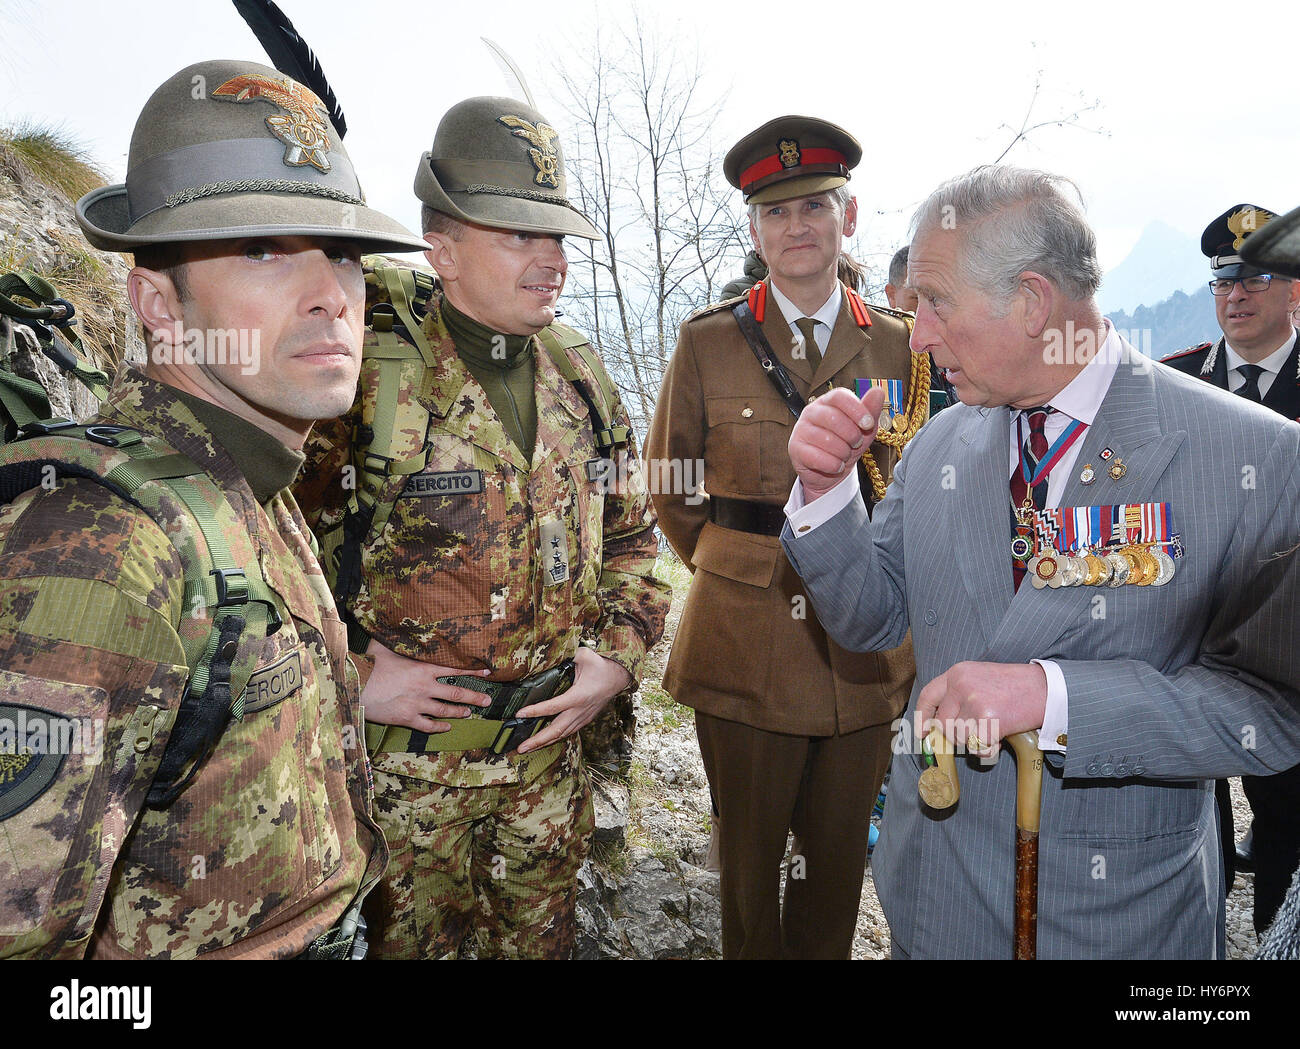 The Prince of Wales with soldiers from Italy's Alpini mountain warfare military corps in the Dolomite mountains in northern Italy, where British soldiers fought alongside Italians against the Austrians in the First World War. Stock Photo